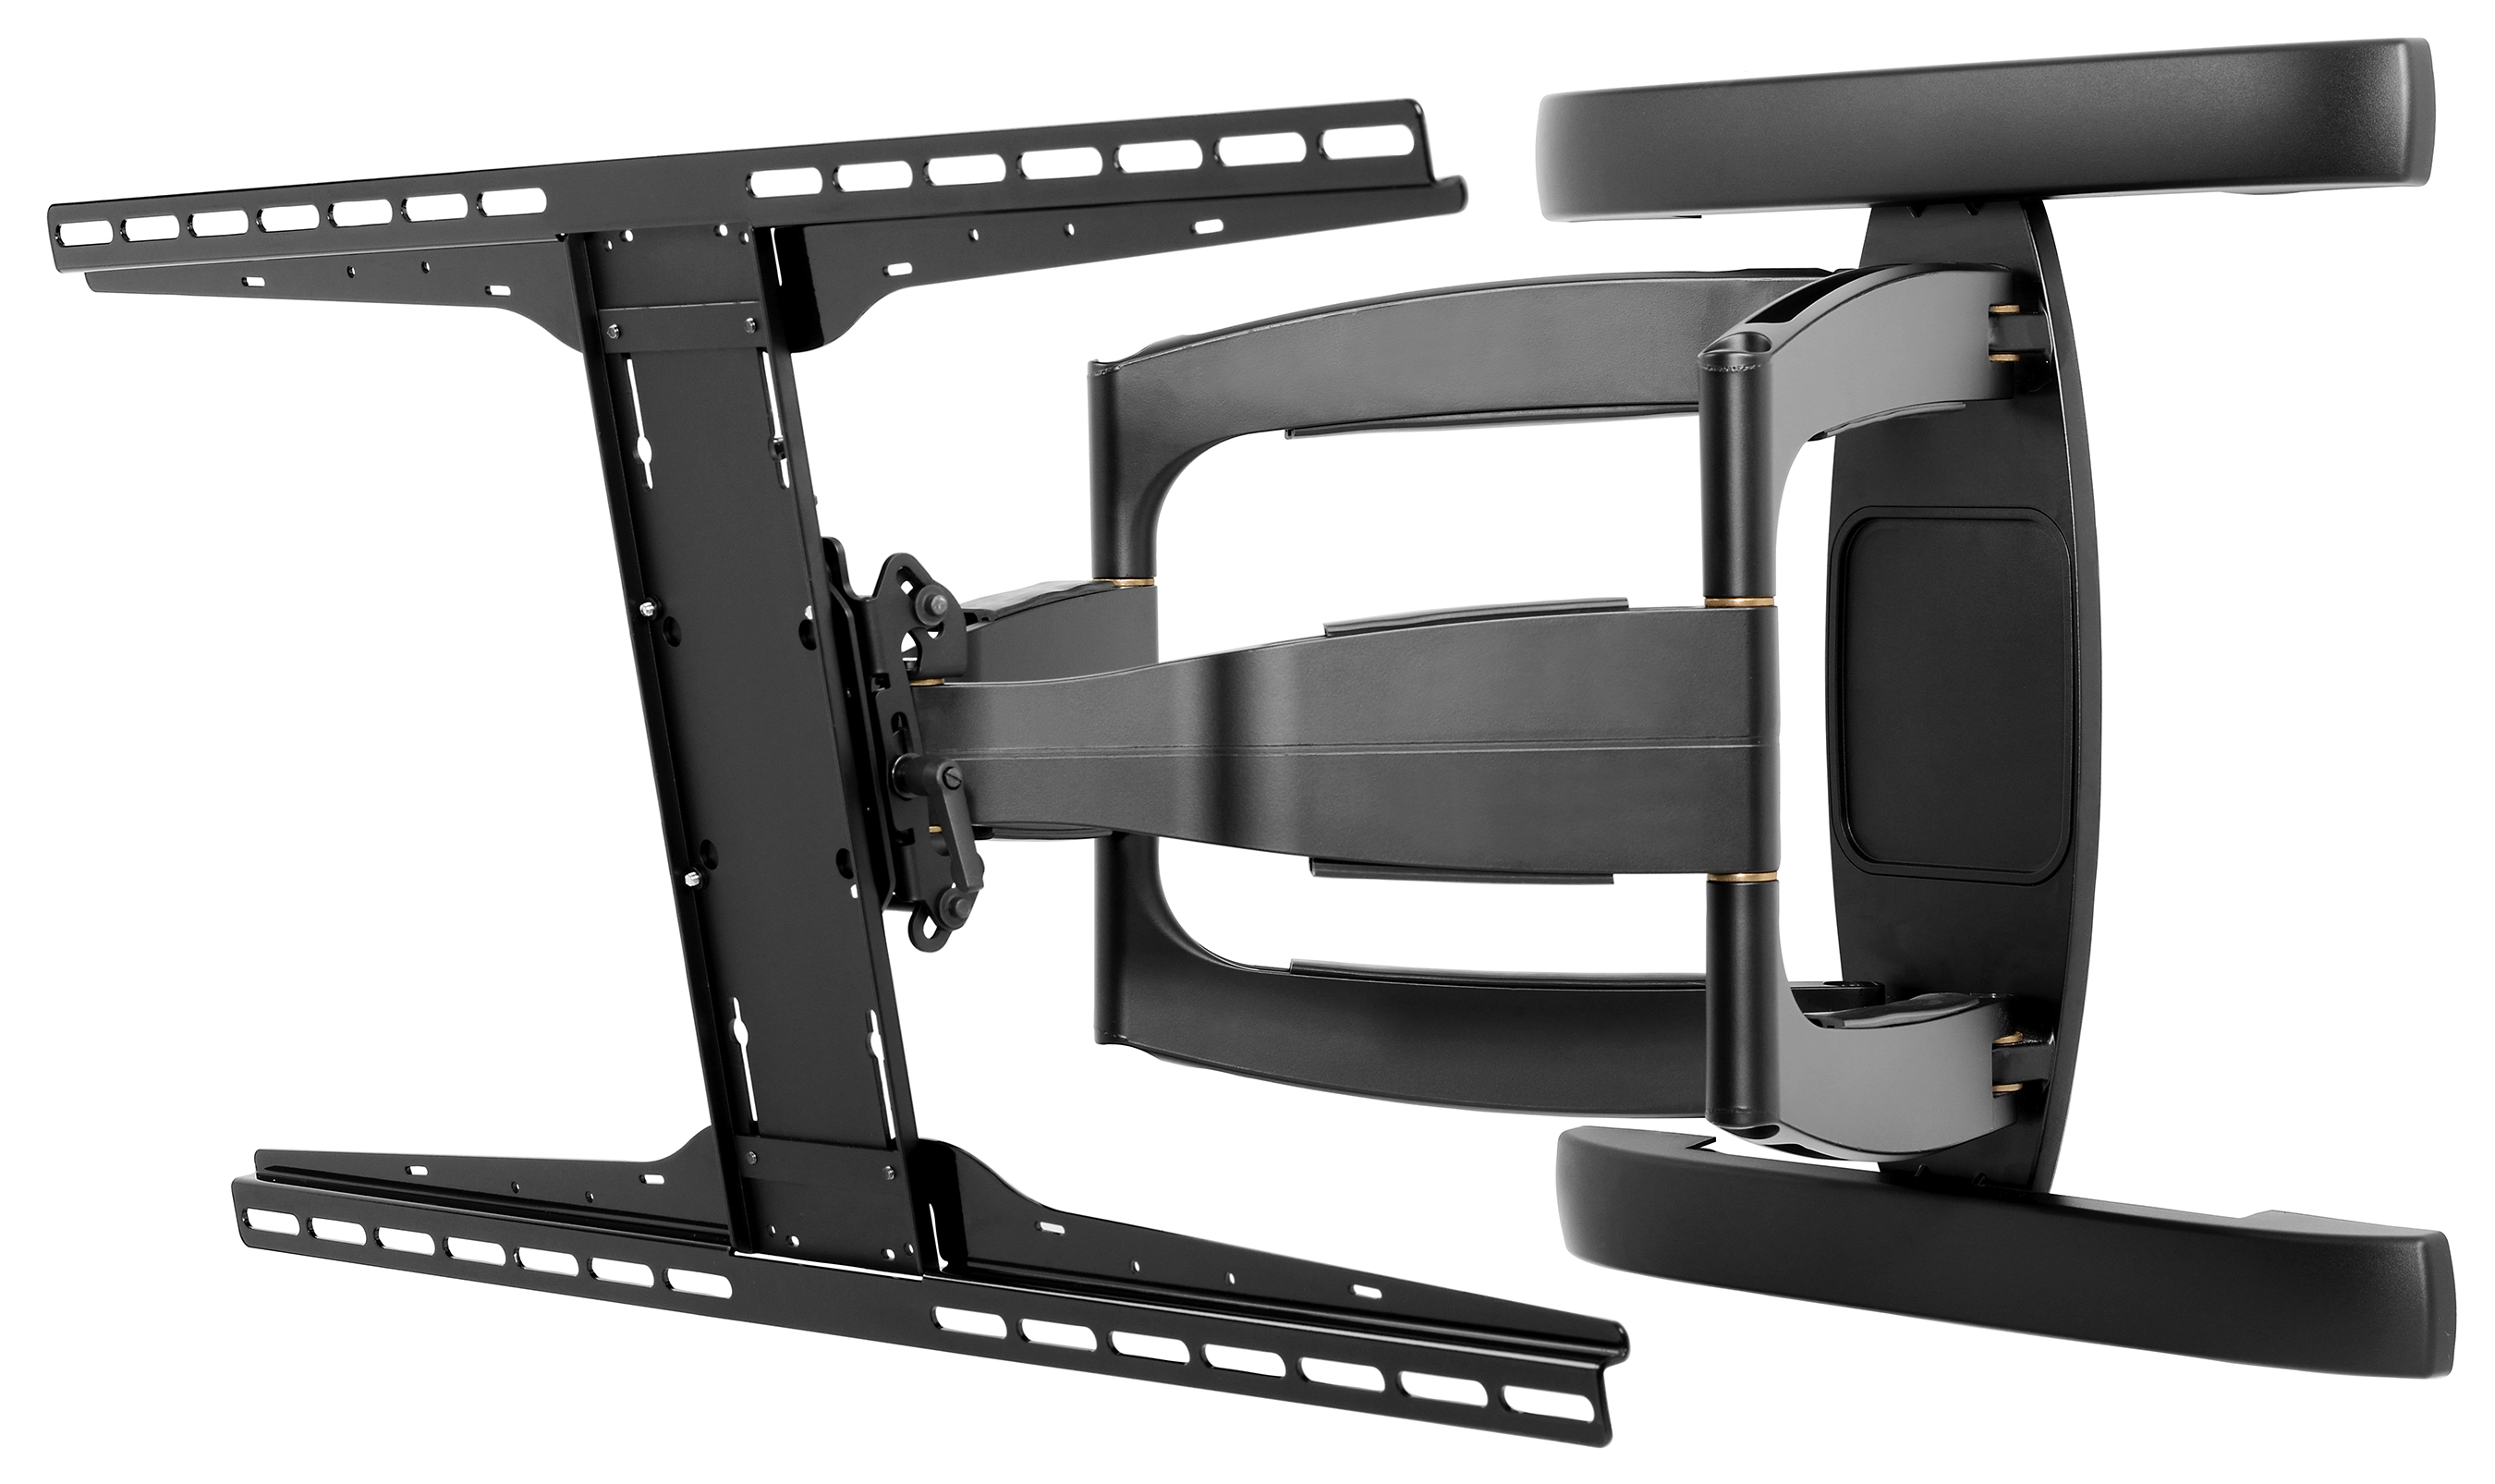 00 - SA771PU SmartMount® Articulating Wall Arm for 46" to 90" Displays